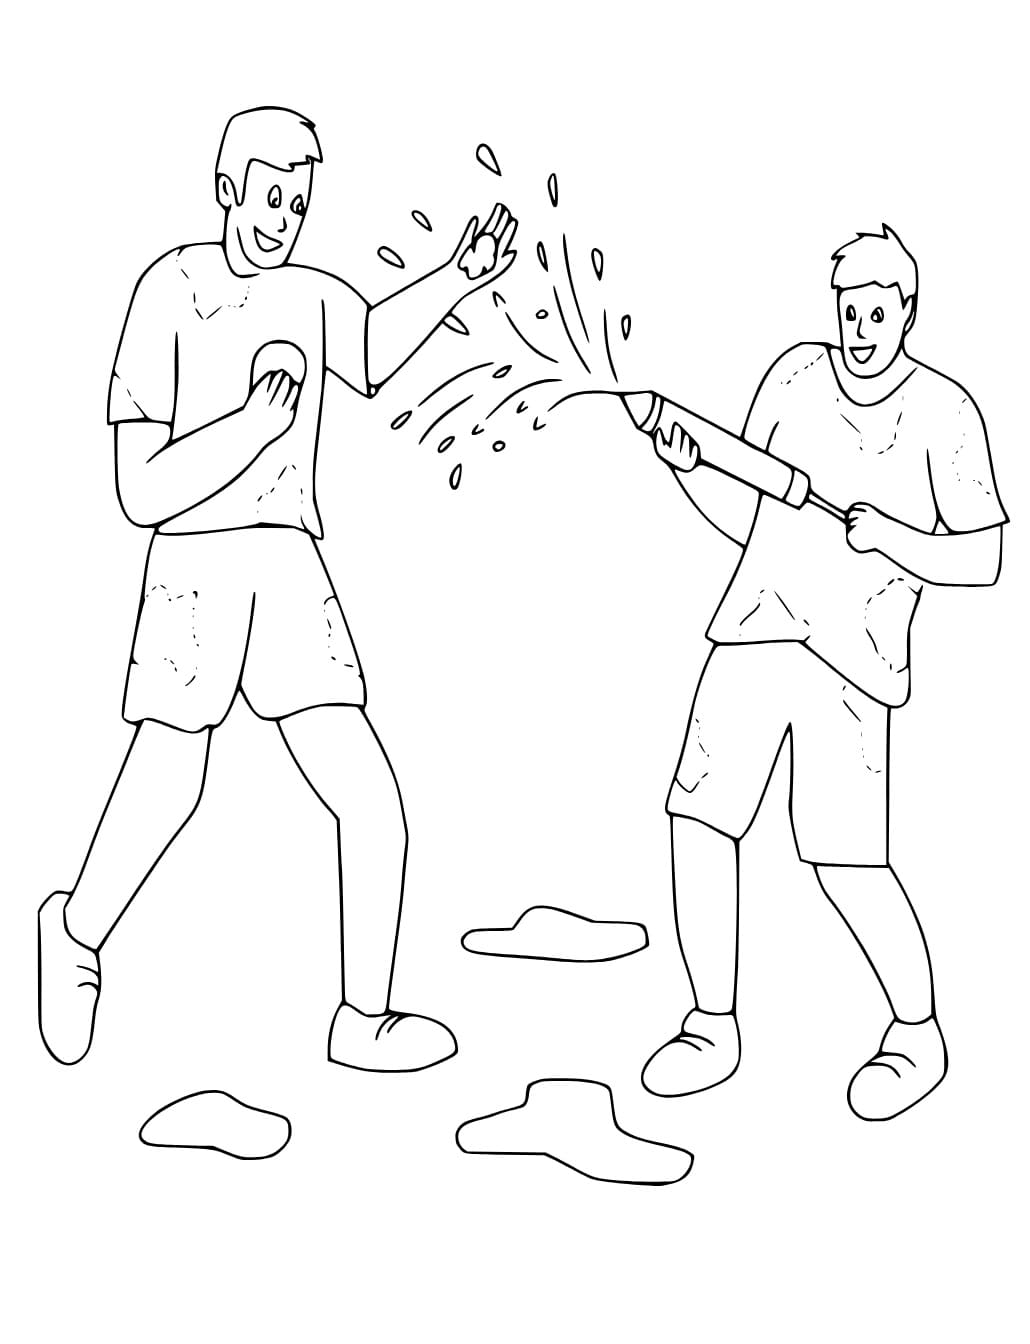 Free Holi coloring page - Download, Print or Color Online for Free